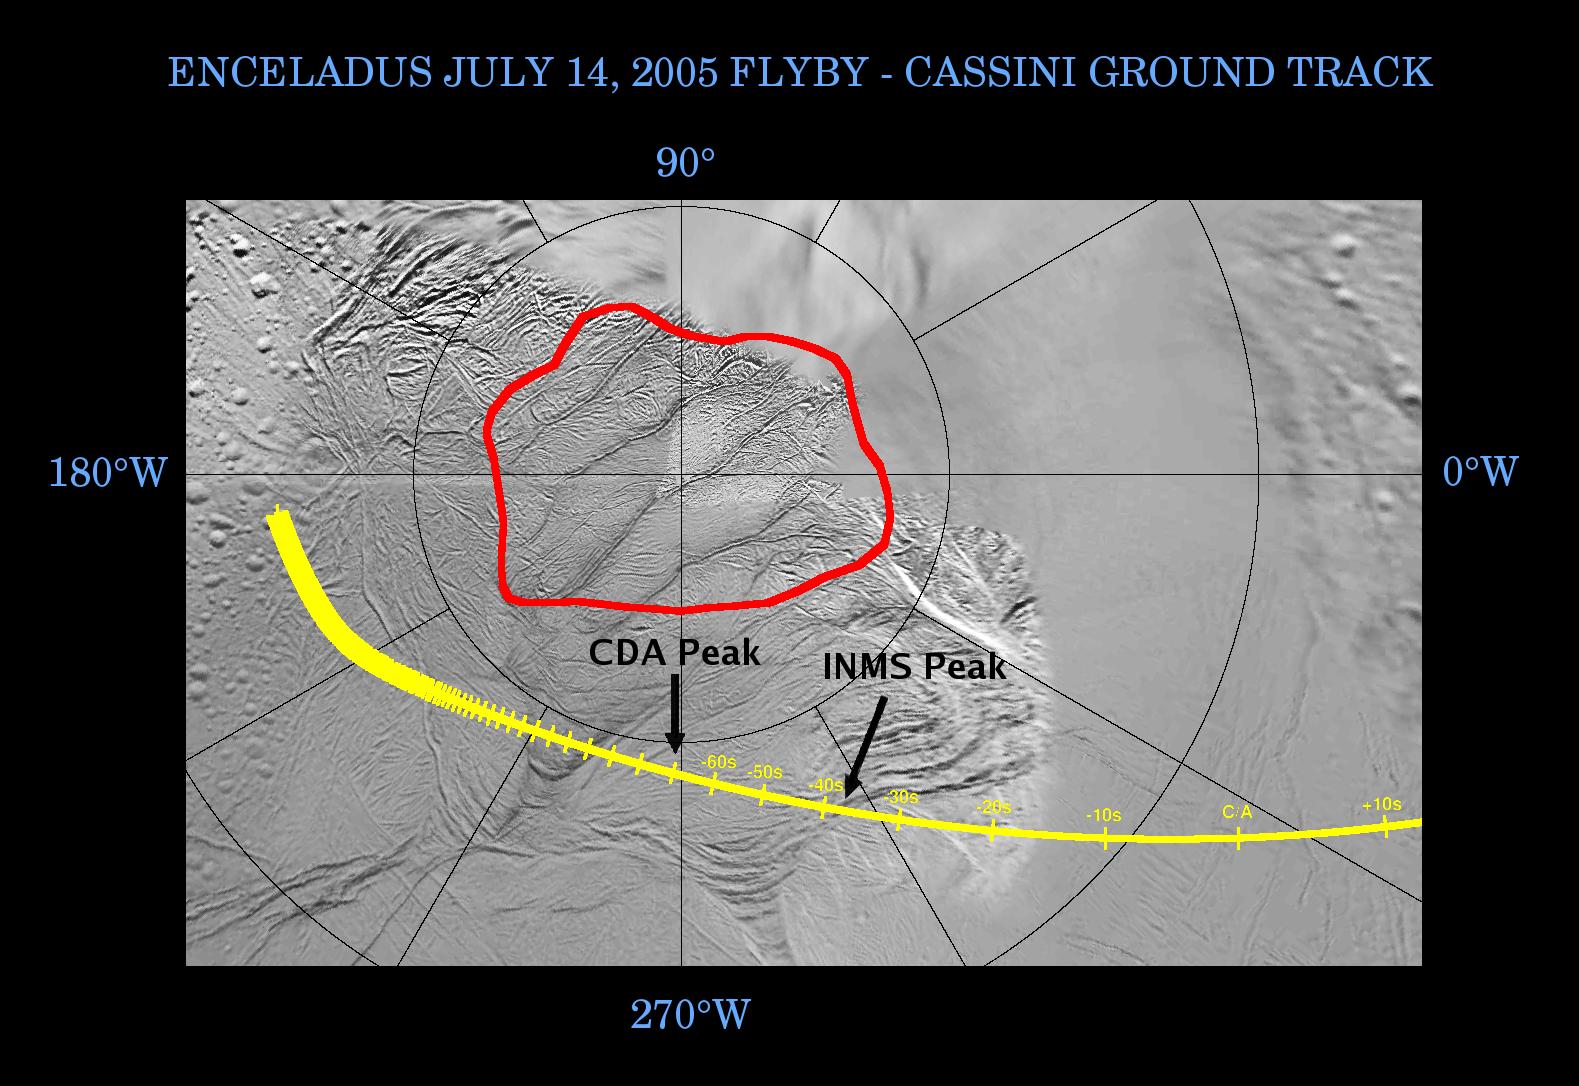 This graphic shows Cassini's path, or ground track, as it crossed over the surface of Enceladus near the time of closest approach during the flyby on July 14, 2005.